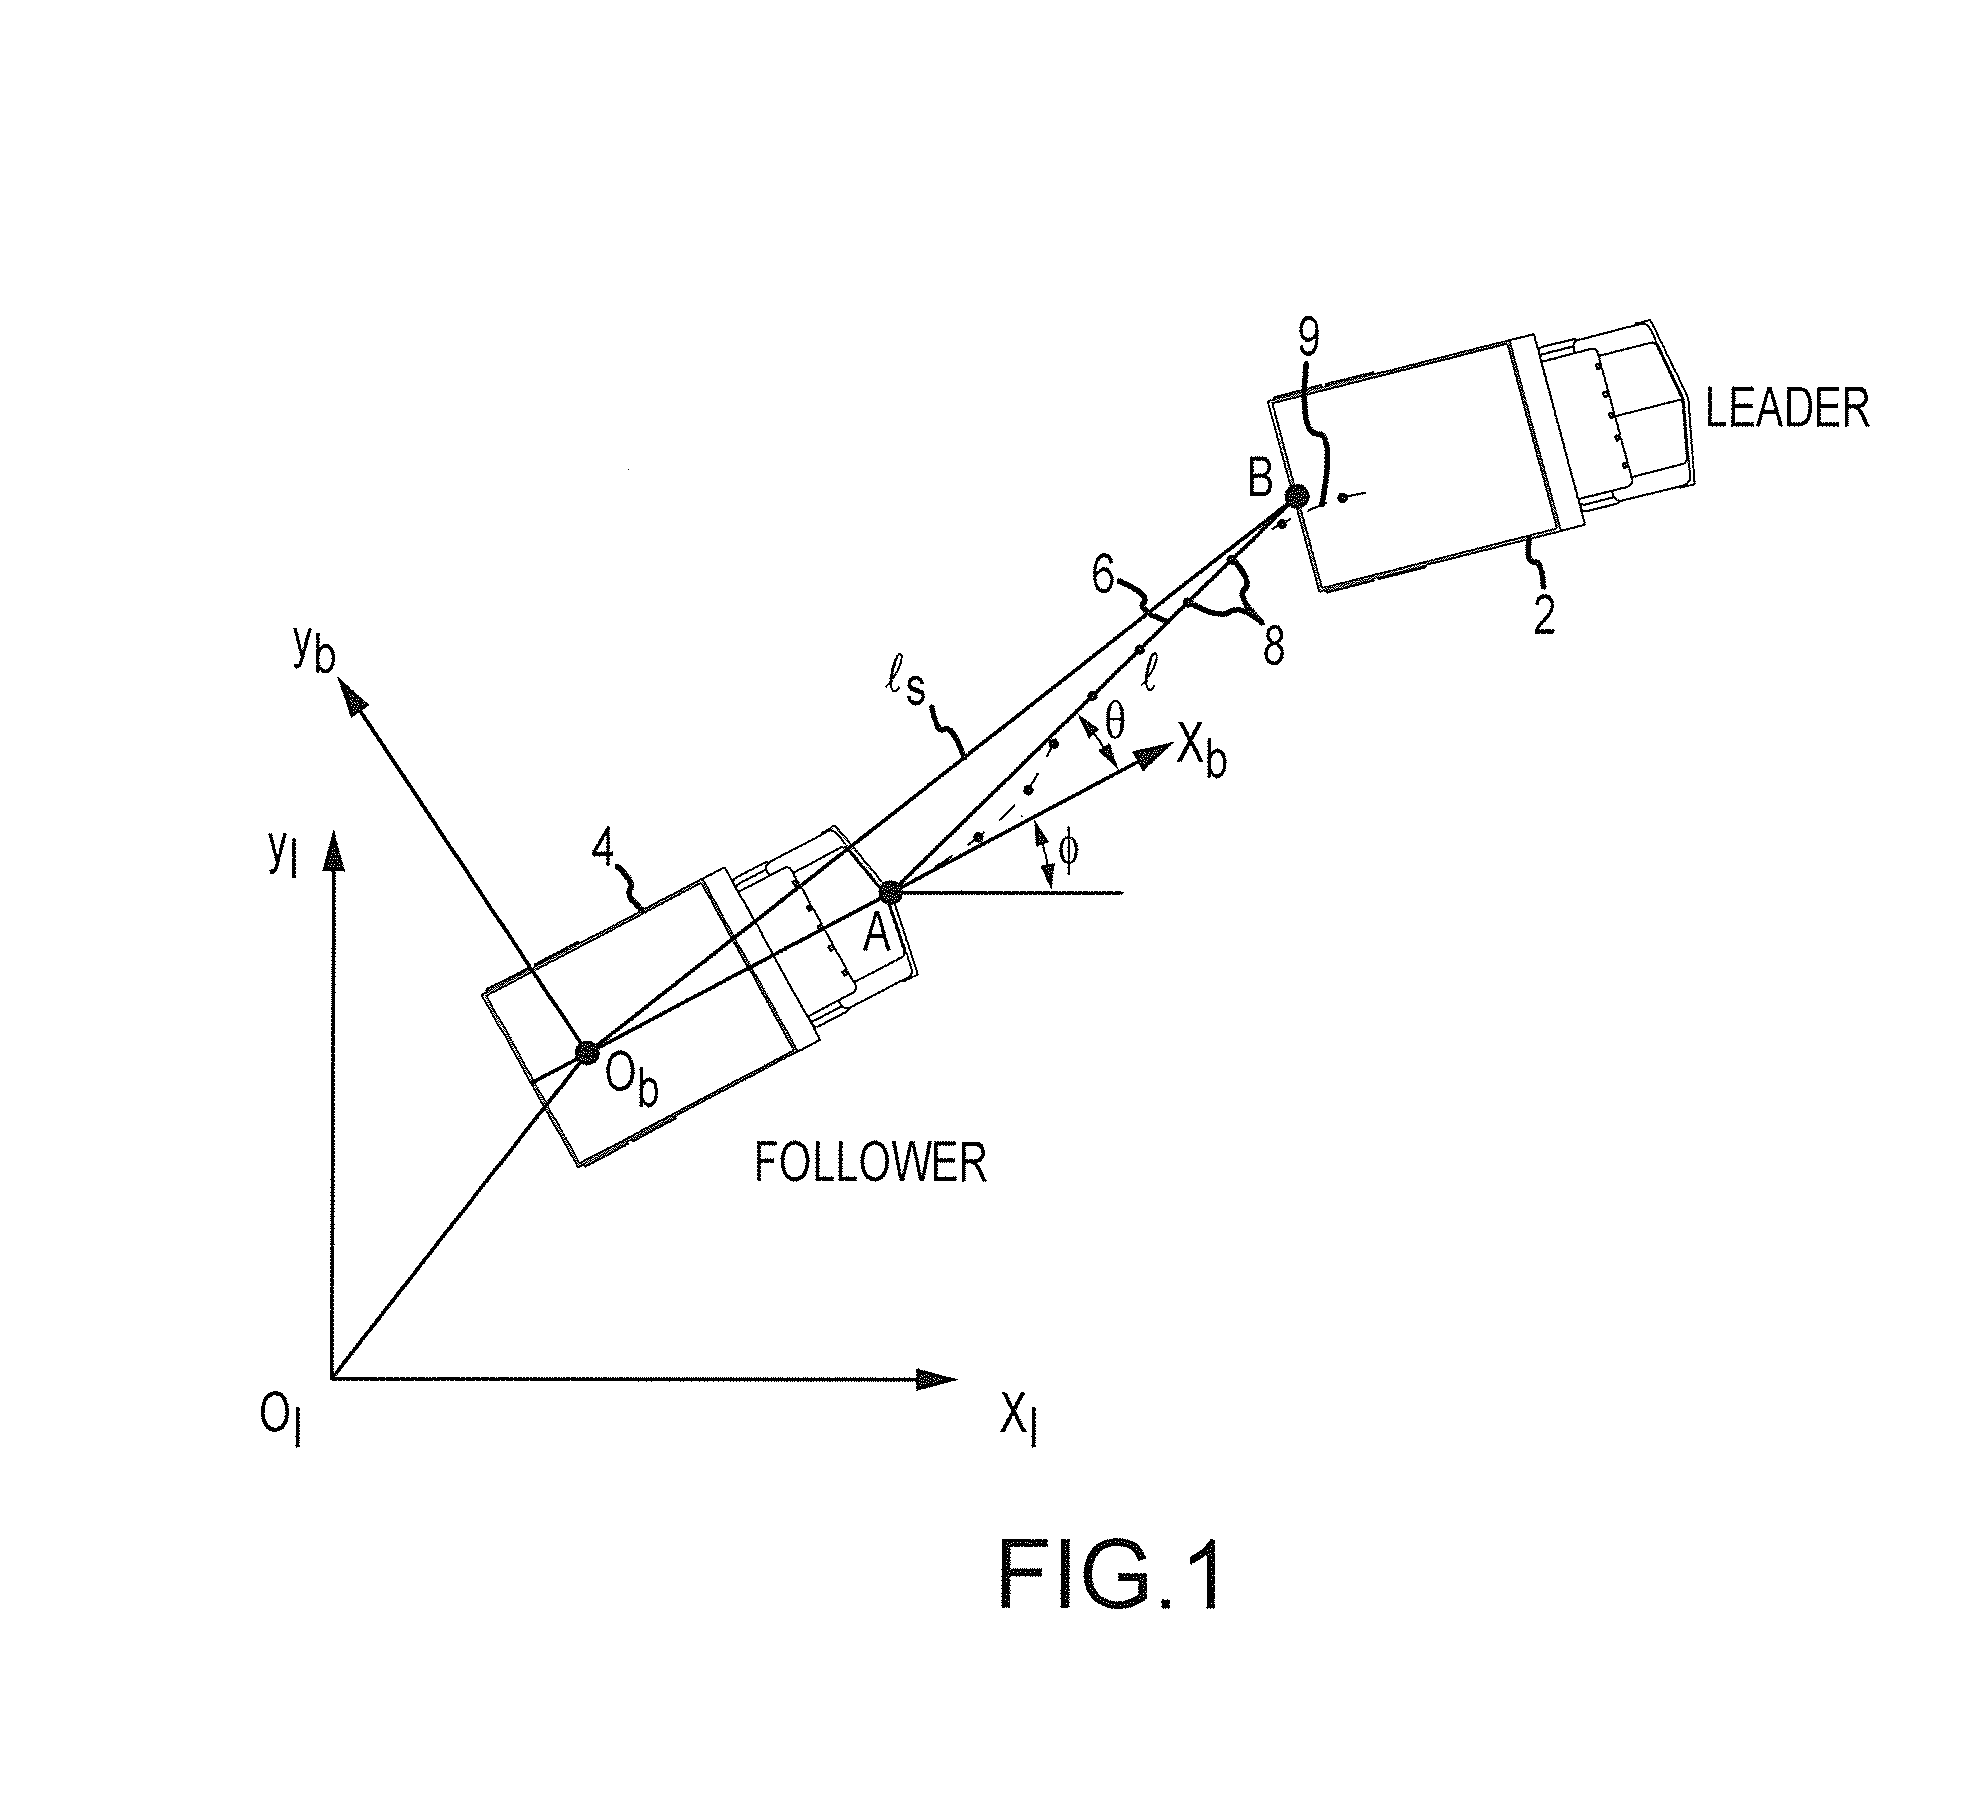 Follower vehicle control system and method for forward and reverse convoy movement